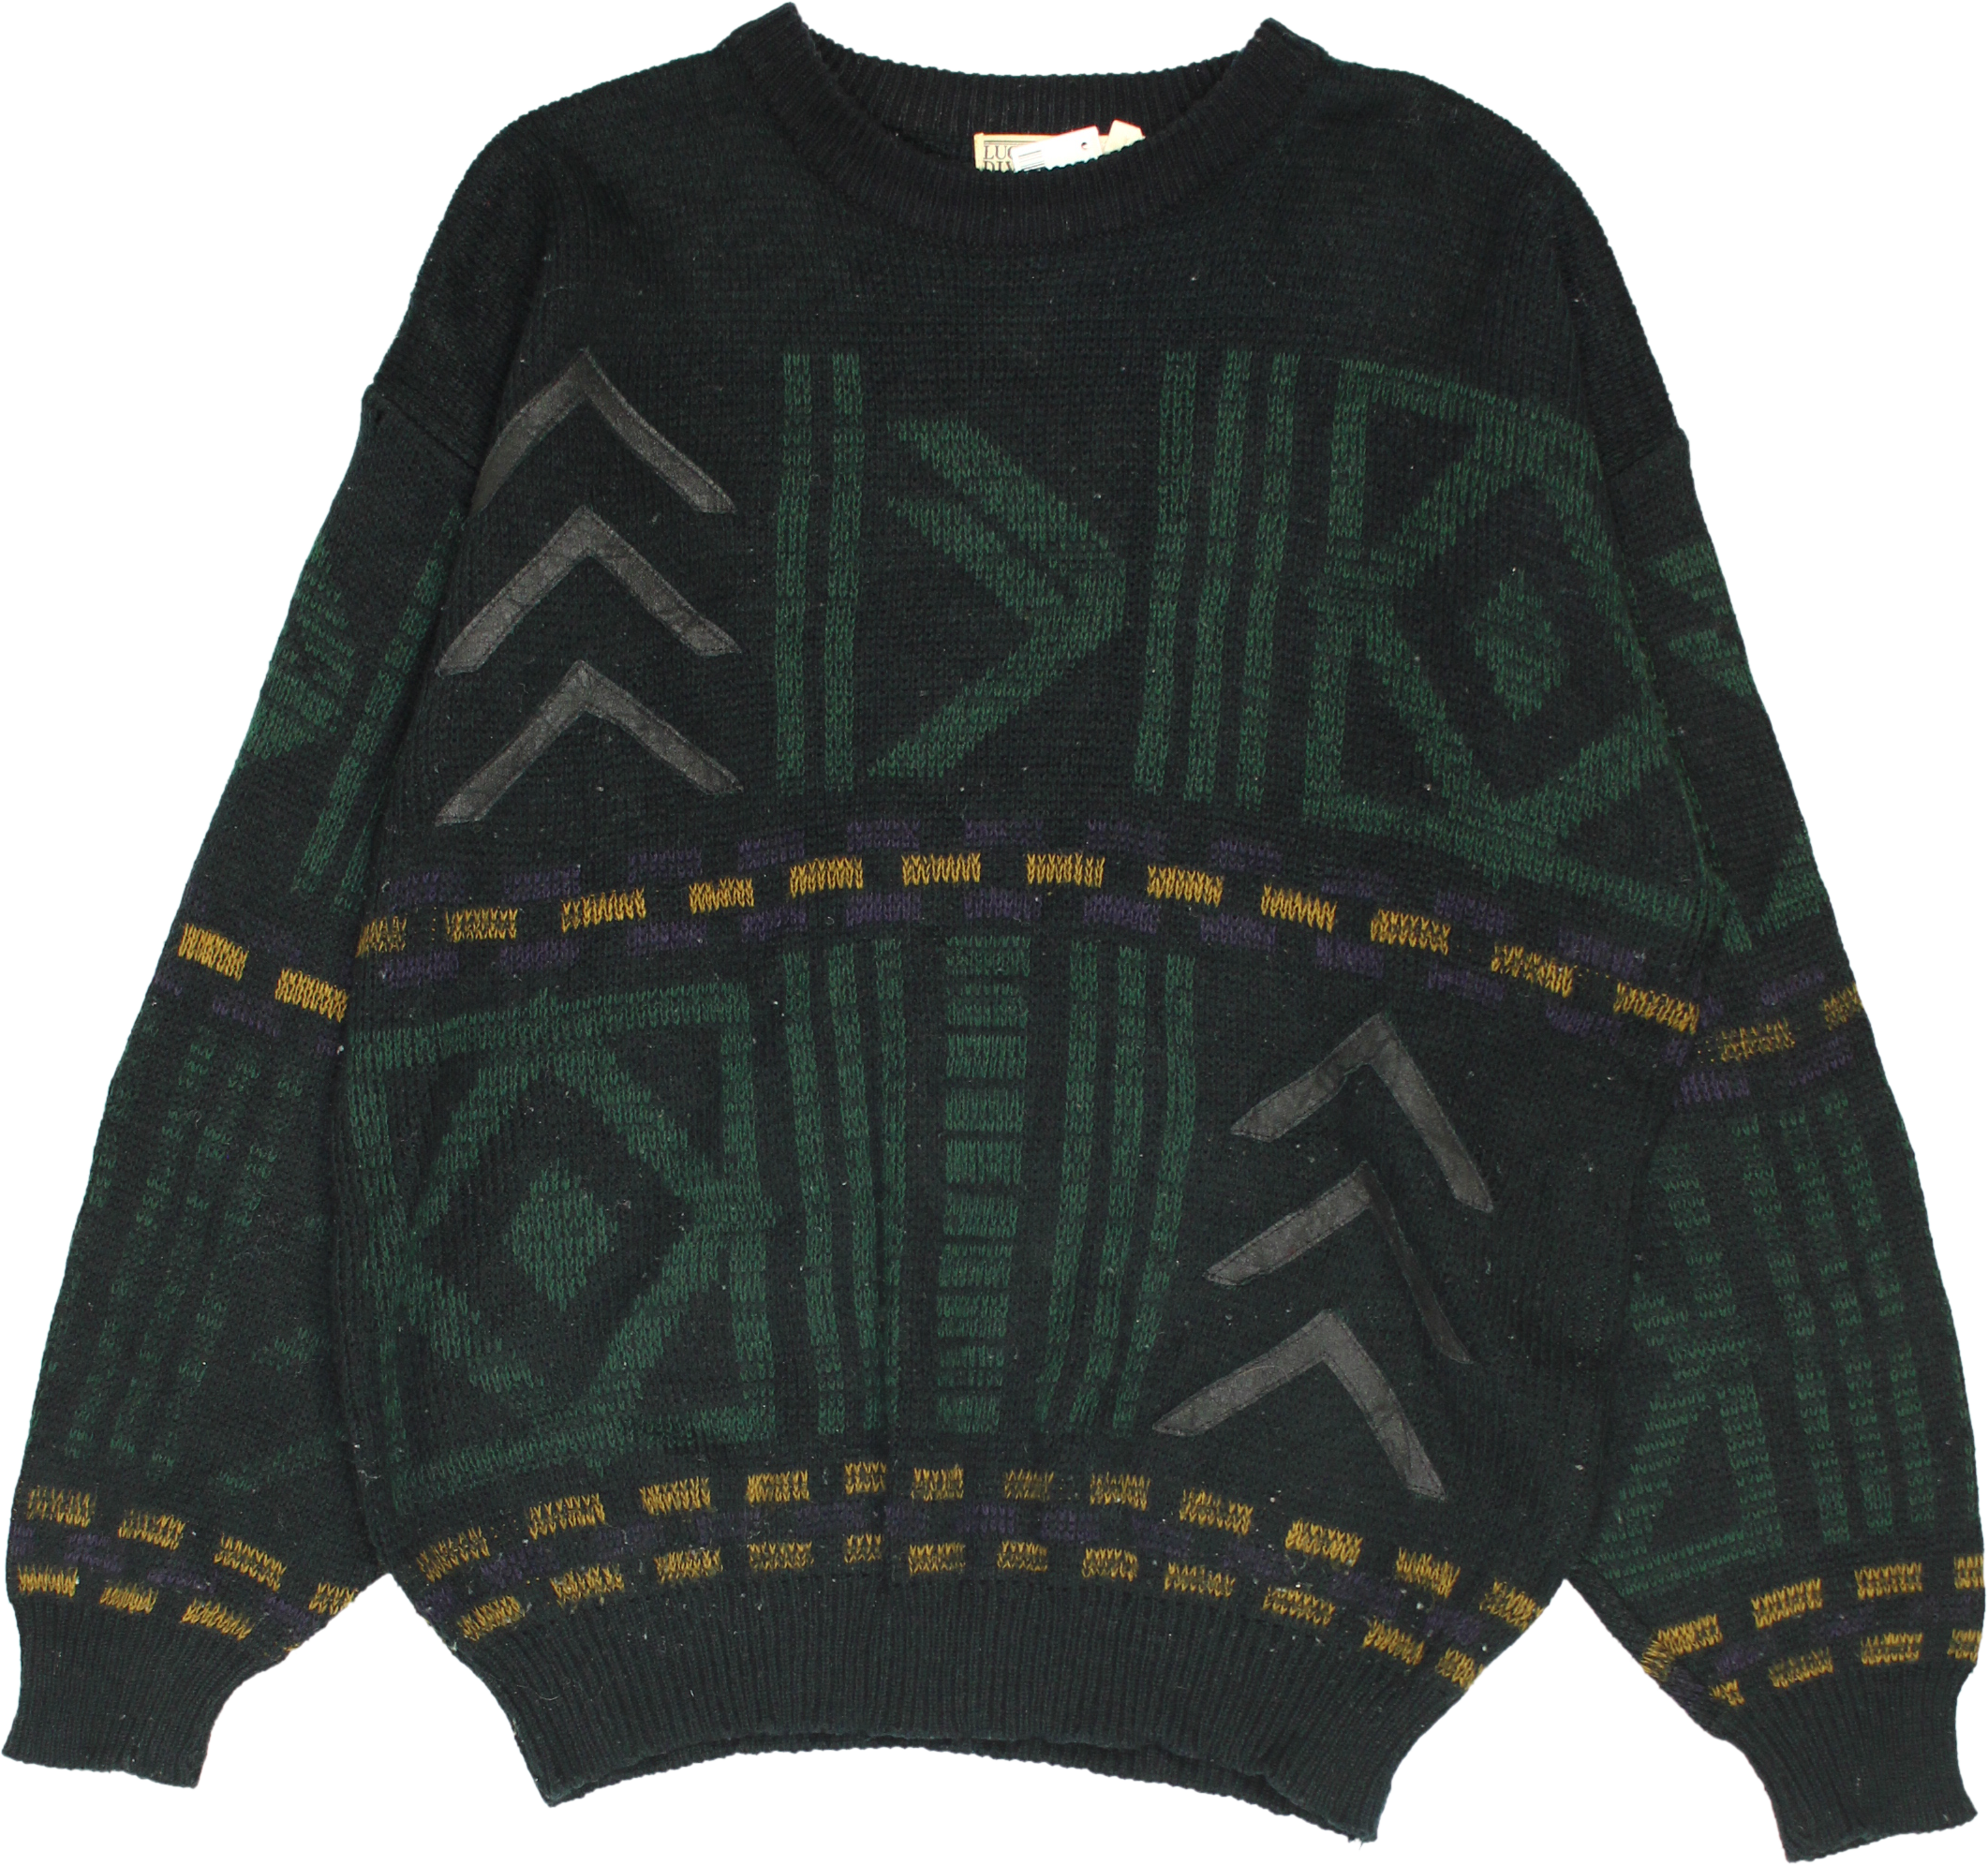 Luciano Divanni - 90s Jumper- ThriftTale.com - Vintage and second handclothing